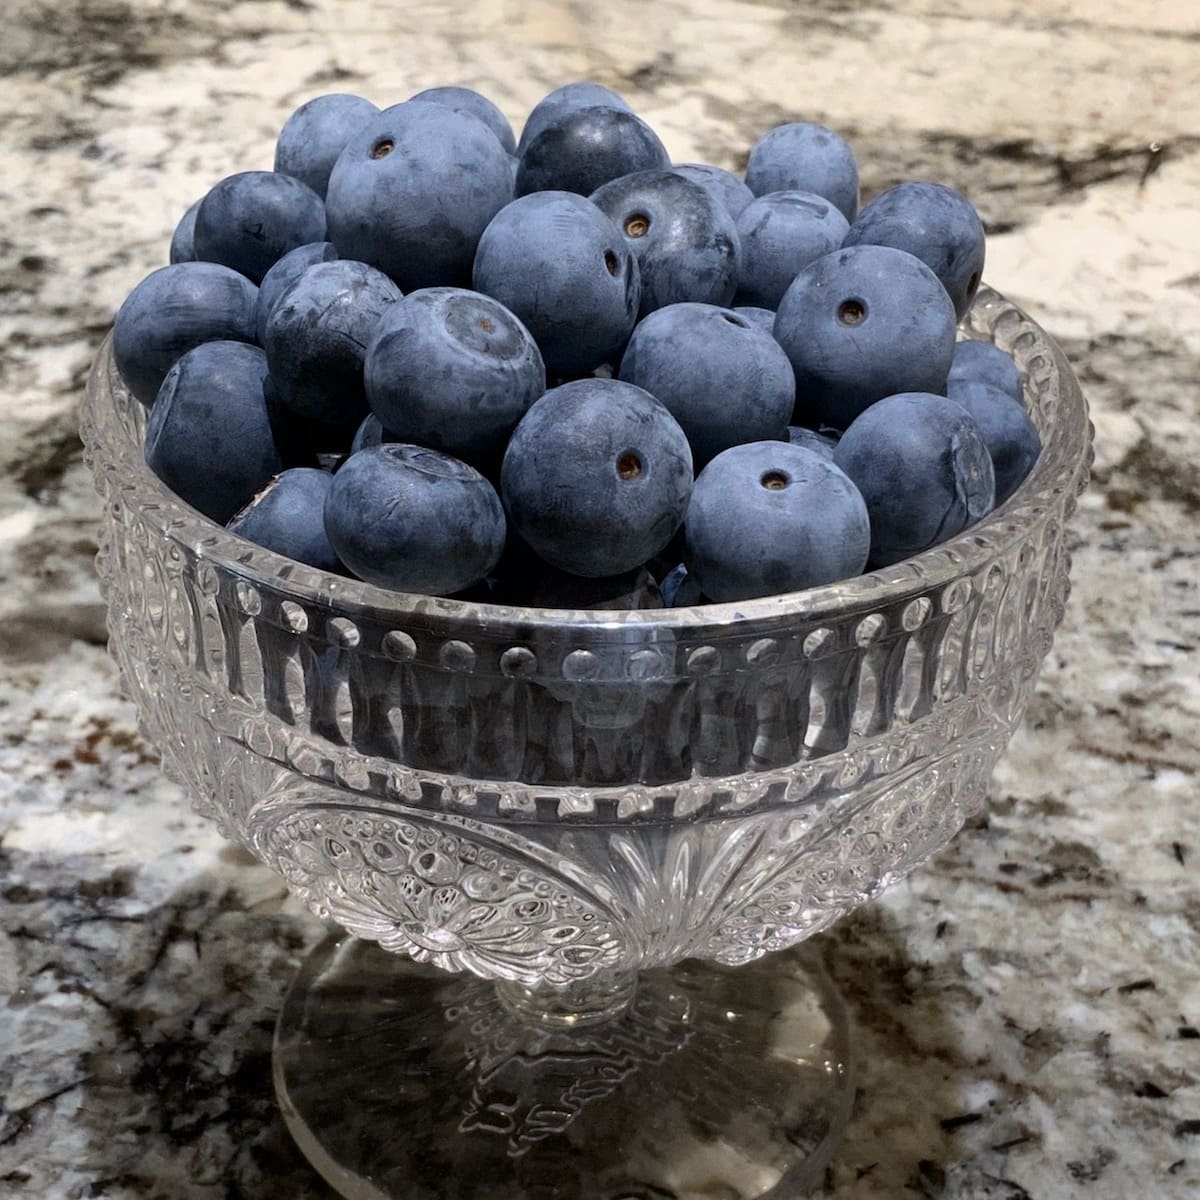 Blueberries in a Glass Dish